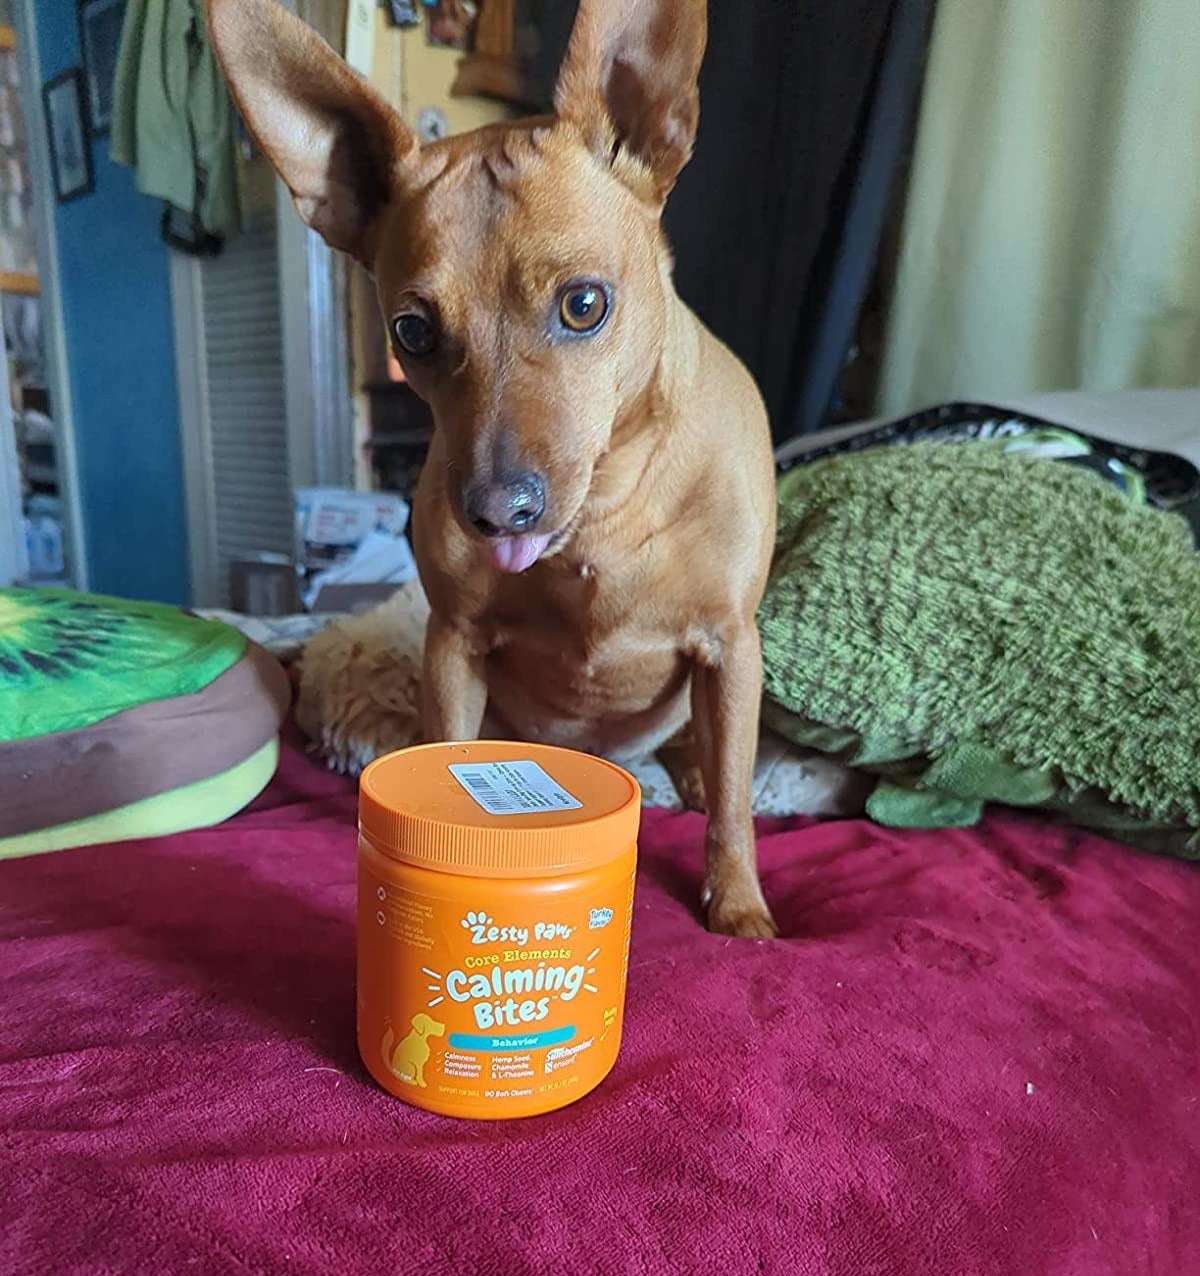 reviewer image of a small dog next to a container of calming bites